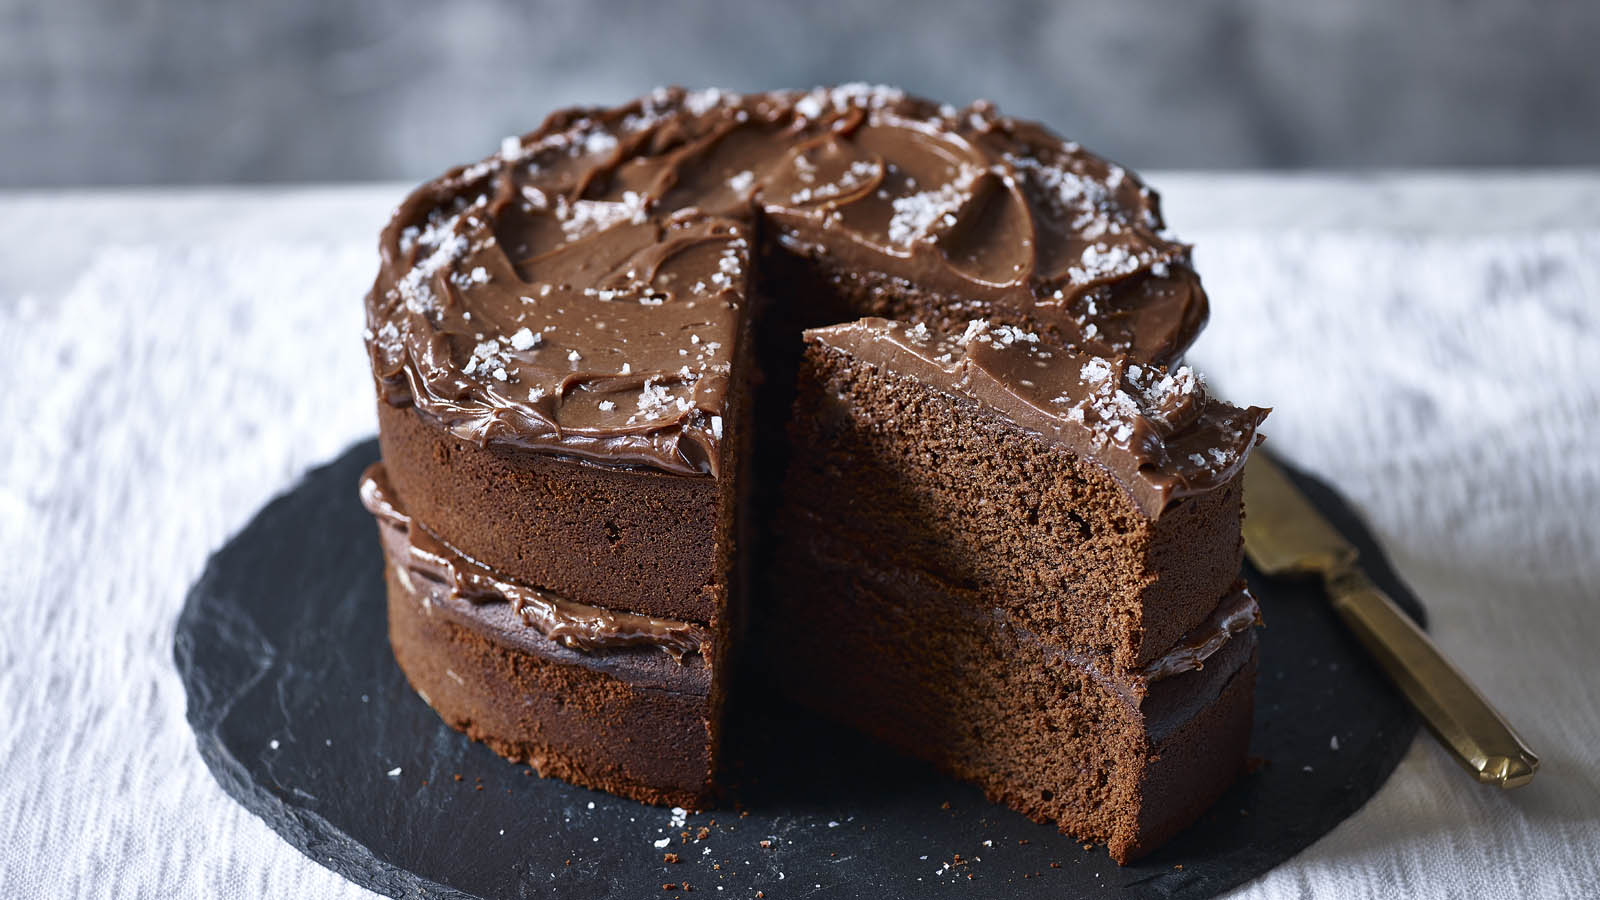 🍫 We Know Whether You’re an Introvert, Extrovert, Or Ambivert Based on How You Rate These Chocolate Desserts Dark Chocolate Cake